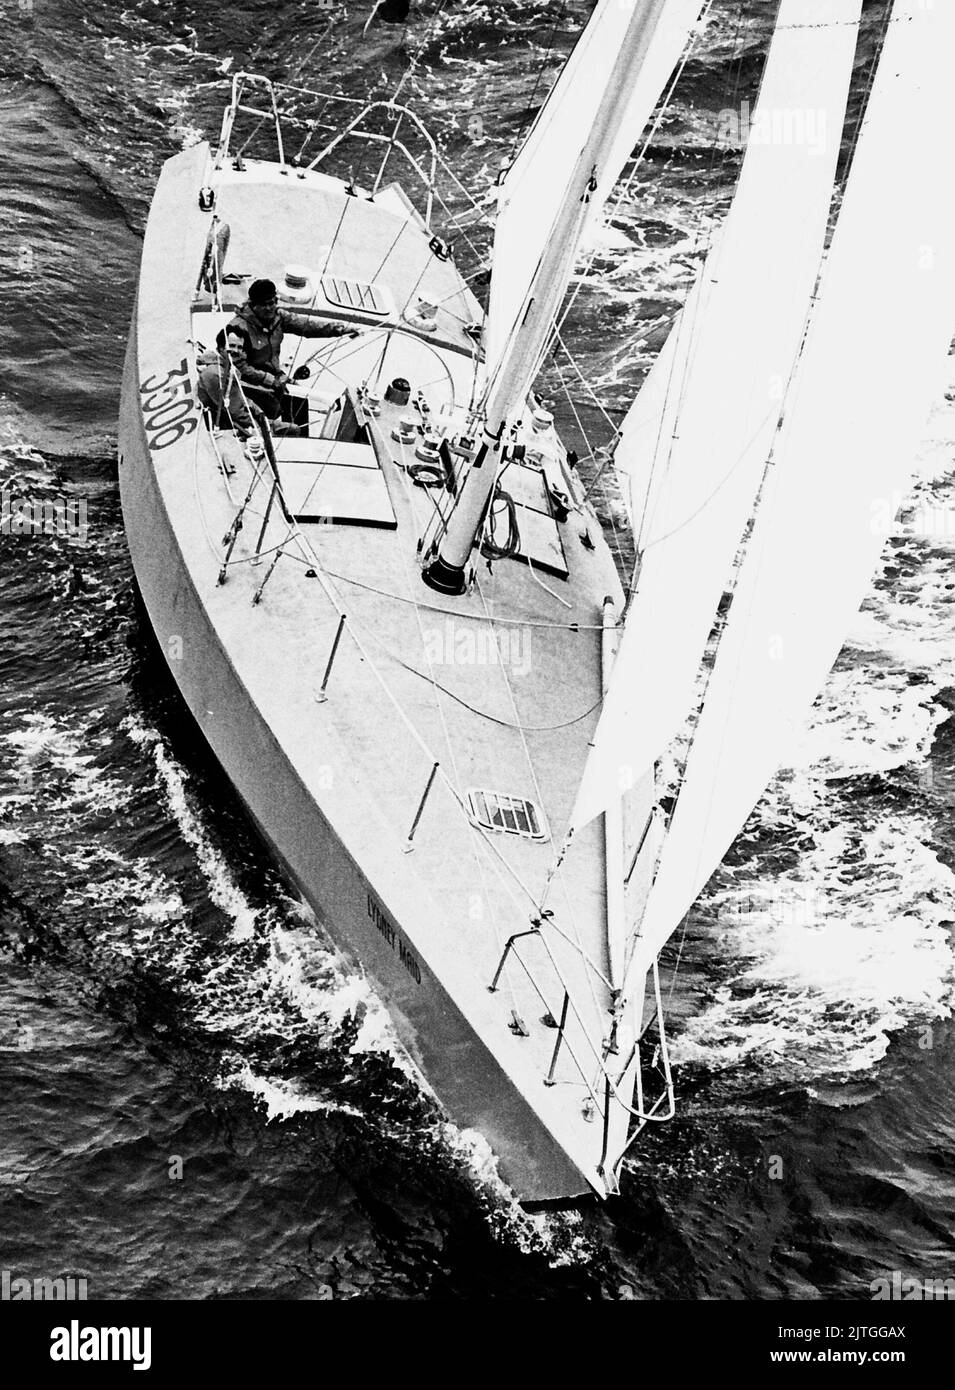 AJAXNETPHOTO. 1978. PLYMOUTH, ENGLAND. - HOME BUILT - ROUND BRITAIN RACE ENTRY LYDNEY MAID, 55FT HOME BUILT MONOHULL SKIPPERED BY HYWELL PRICE AND CREWED BY RICHARD LINNELL PICTURED AT START OF RACE IN PLYMOUTH SOUND. PHOTO:JONATHAN EASTLAND/AJAX REF:340 220105 7 Stock Photo